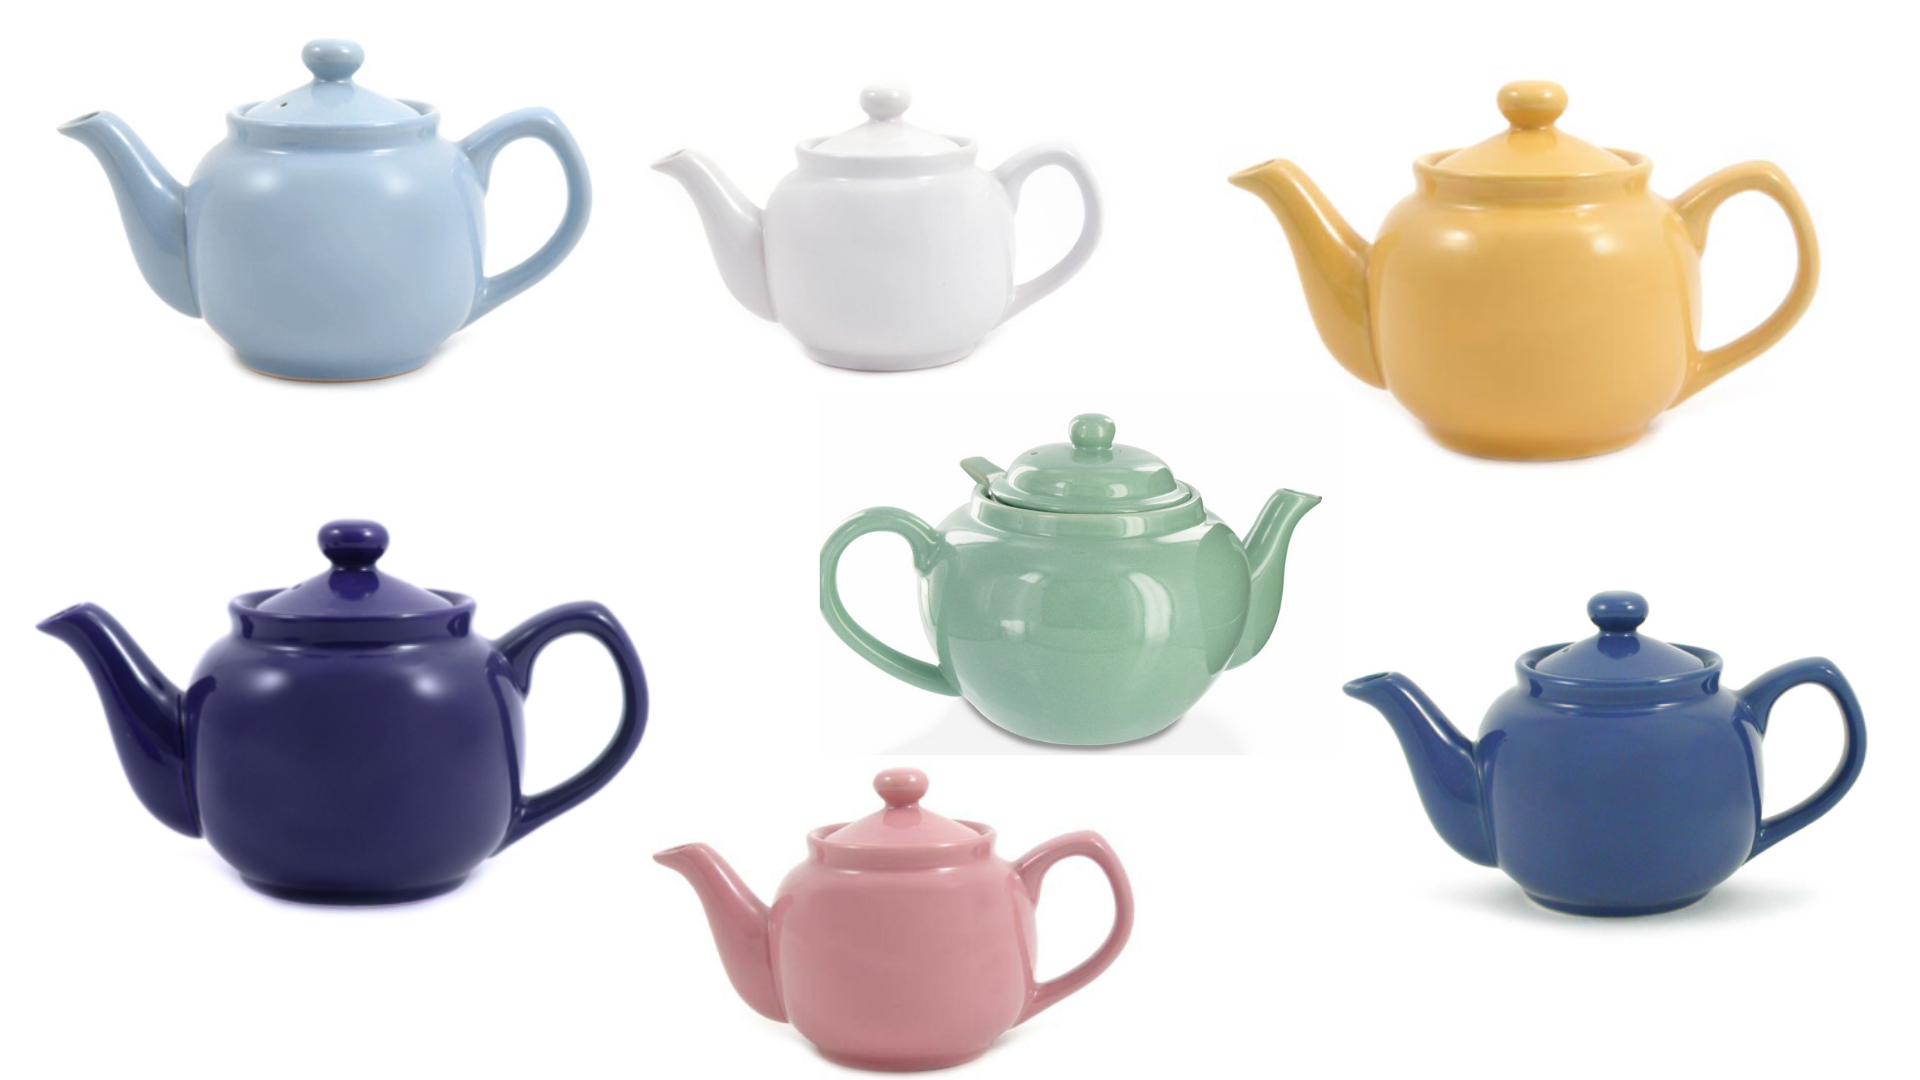 Amsterdam Teapots, the 1st Giveaway of TSLL’s 4th Annual British Week!